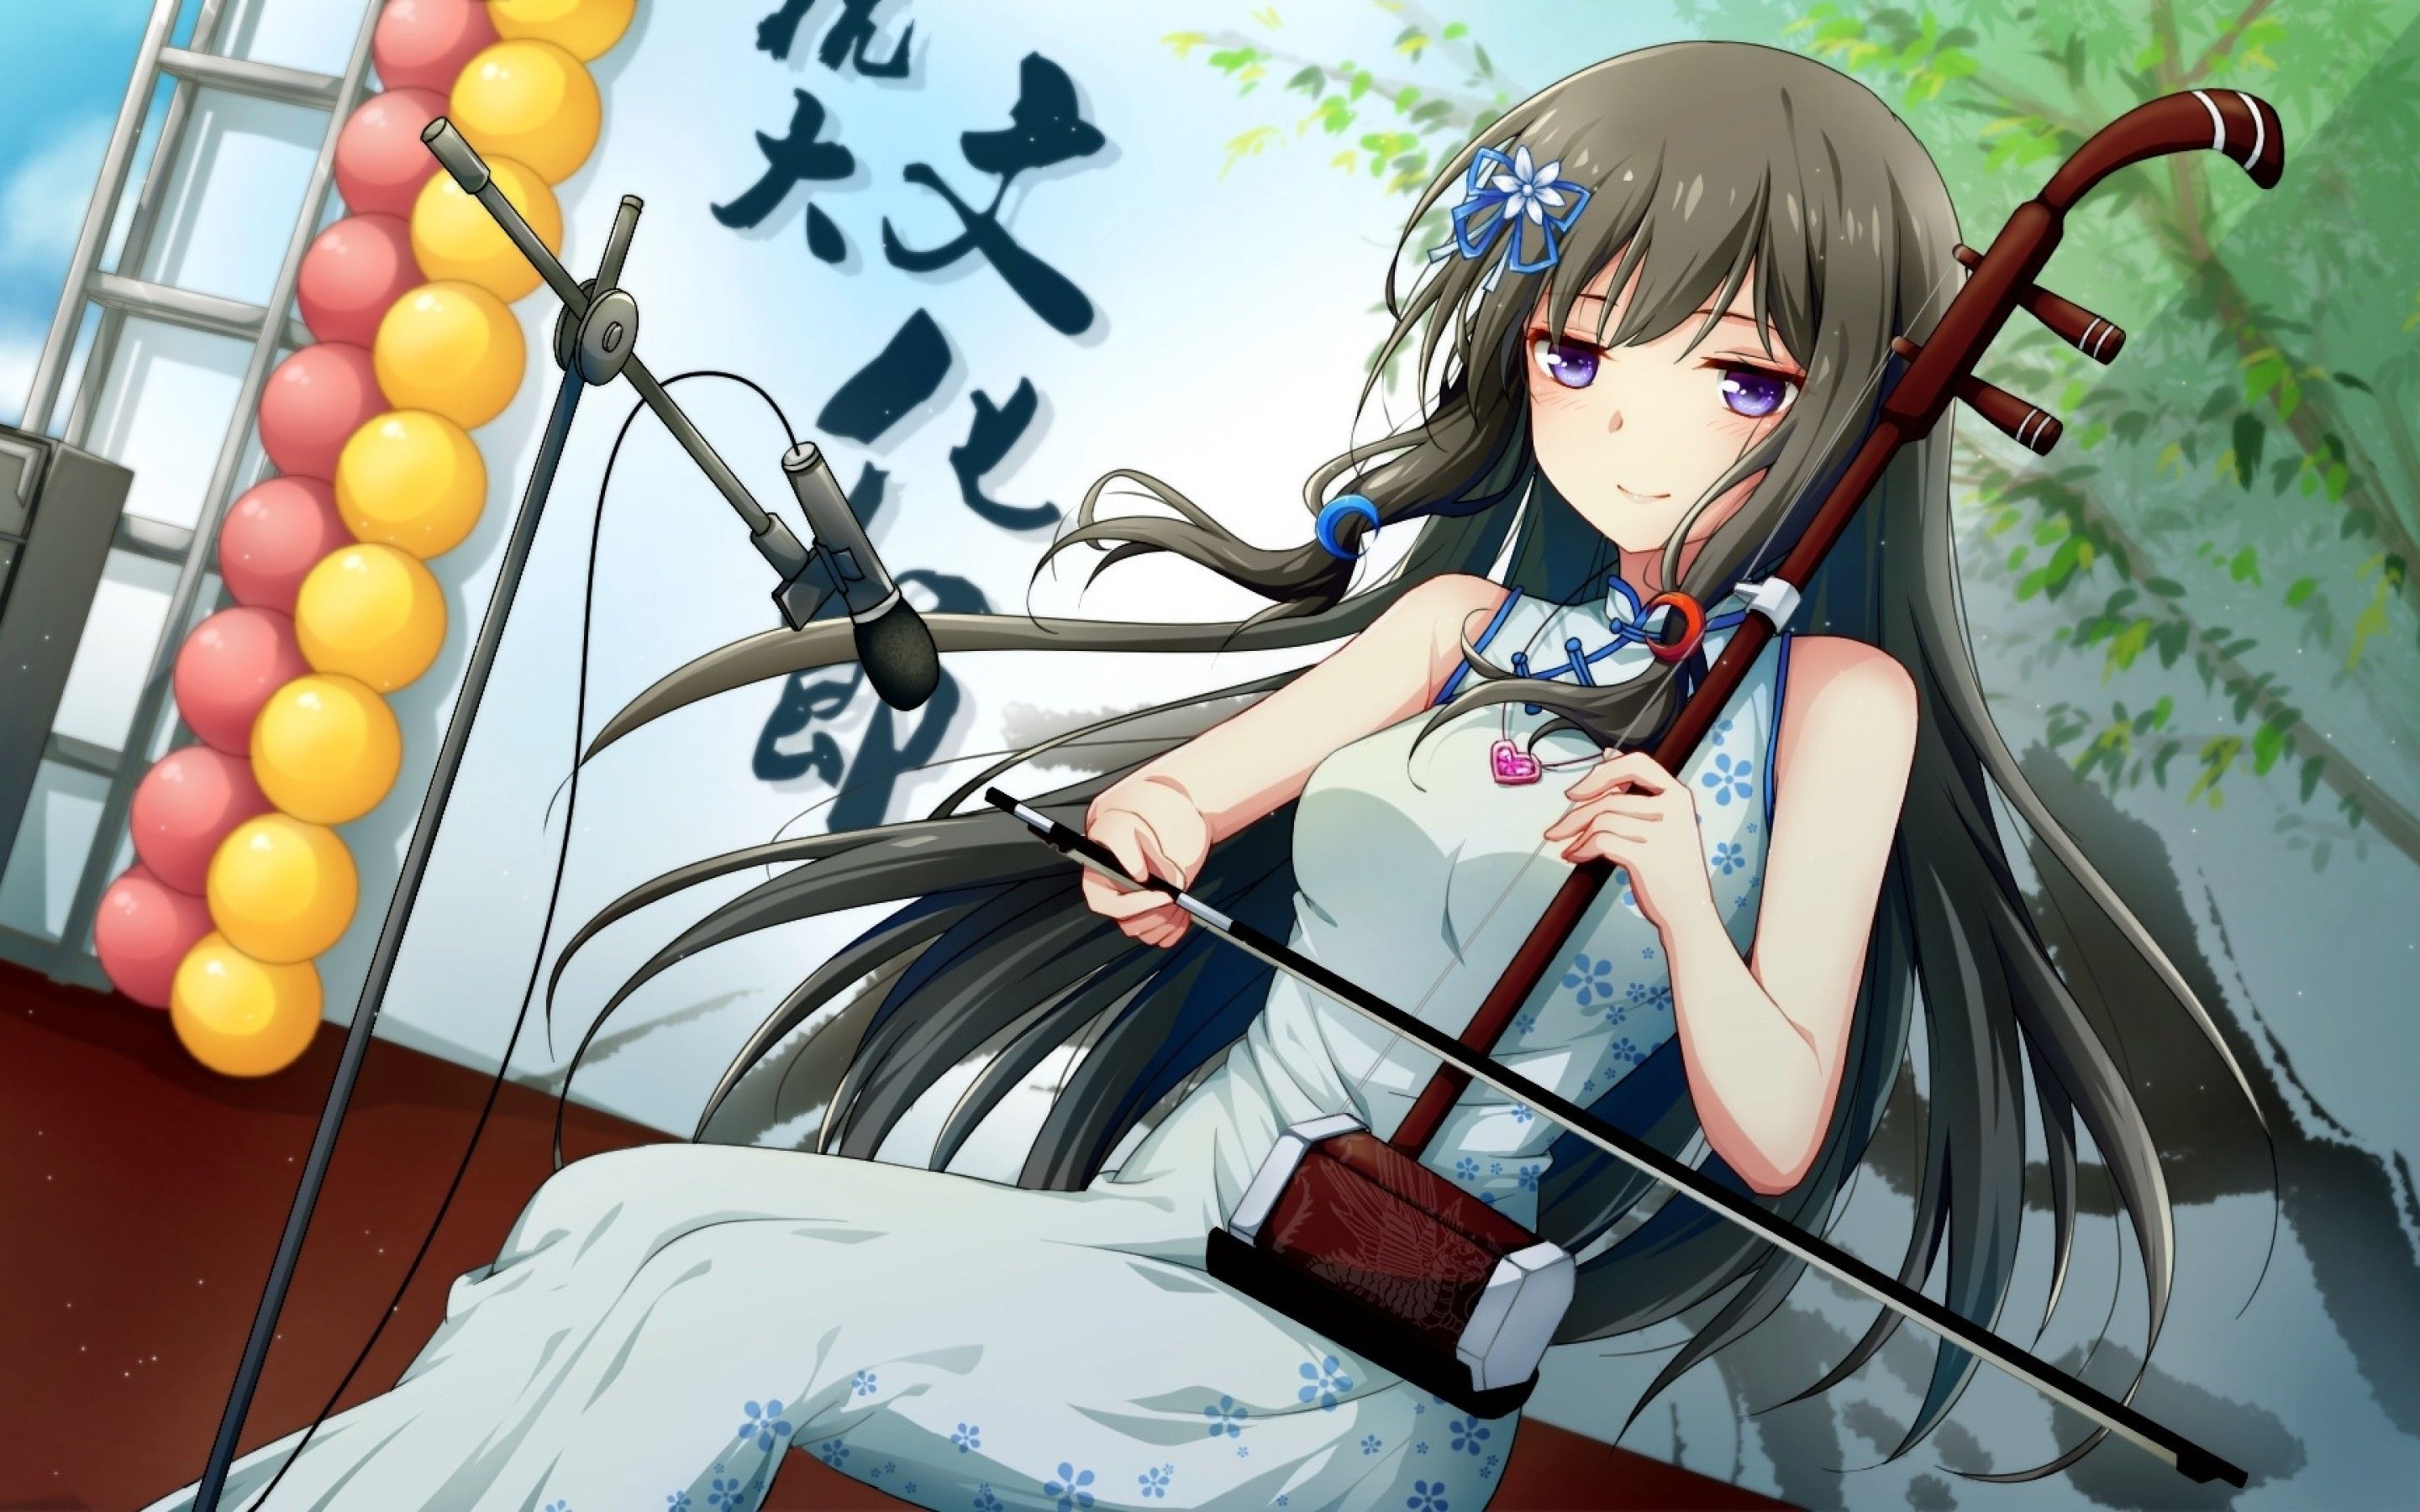 Download 2880x1800 Anime Girl, Chinese Dress, Instrument, Black